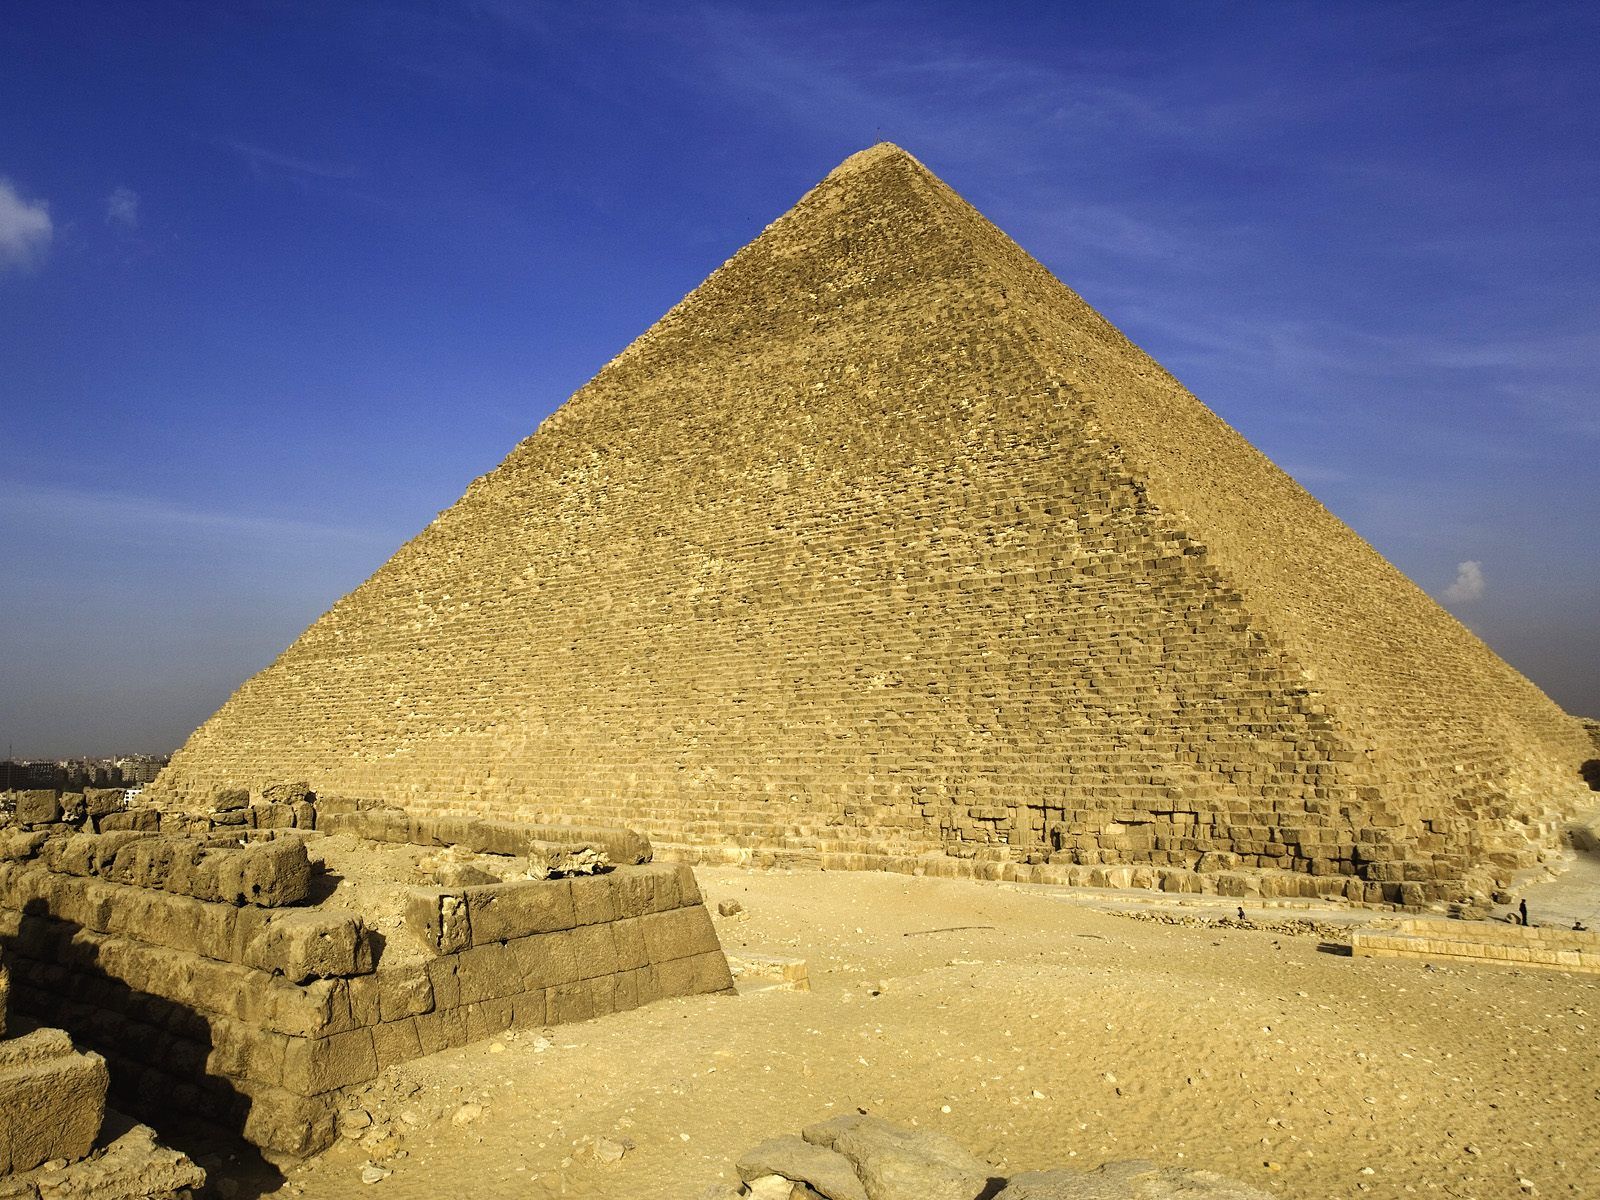 The Great Pyramid of Giza (also called the Pyramid of Khufu and the ...